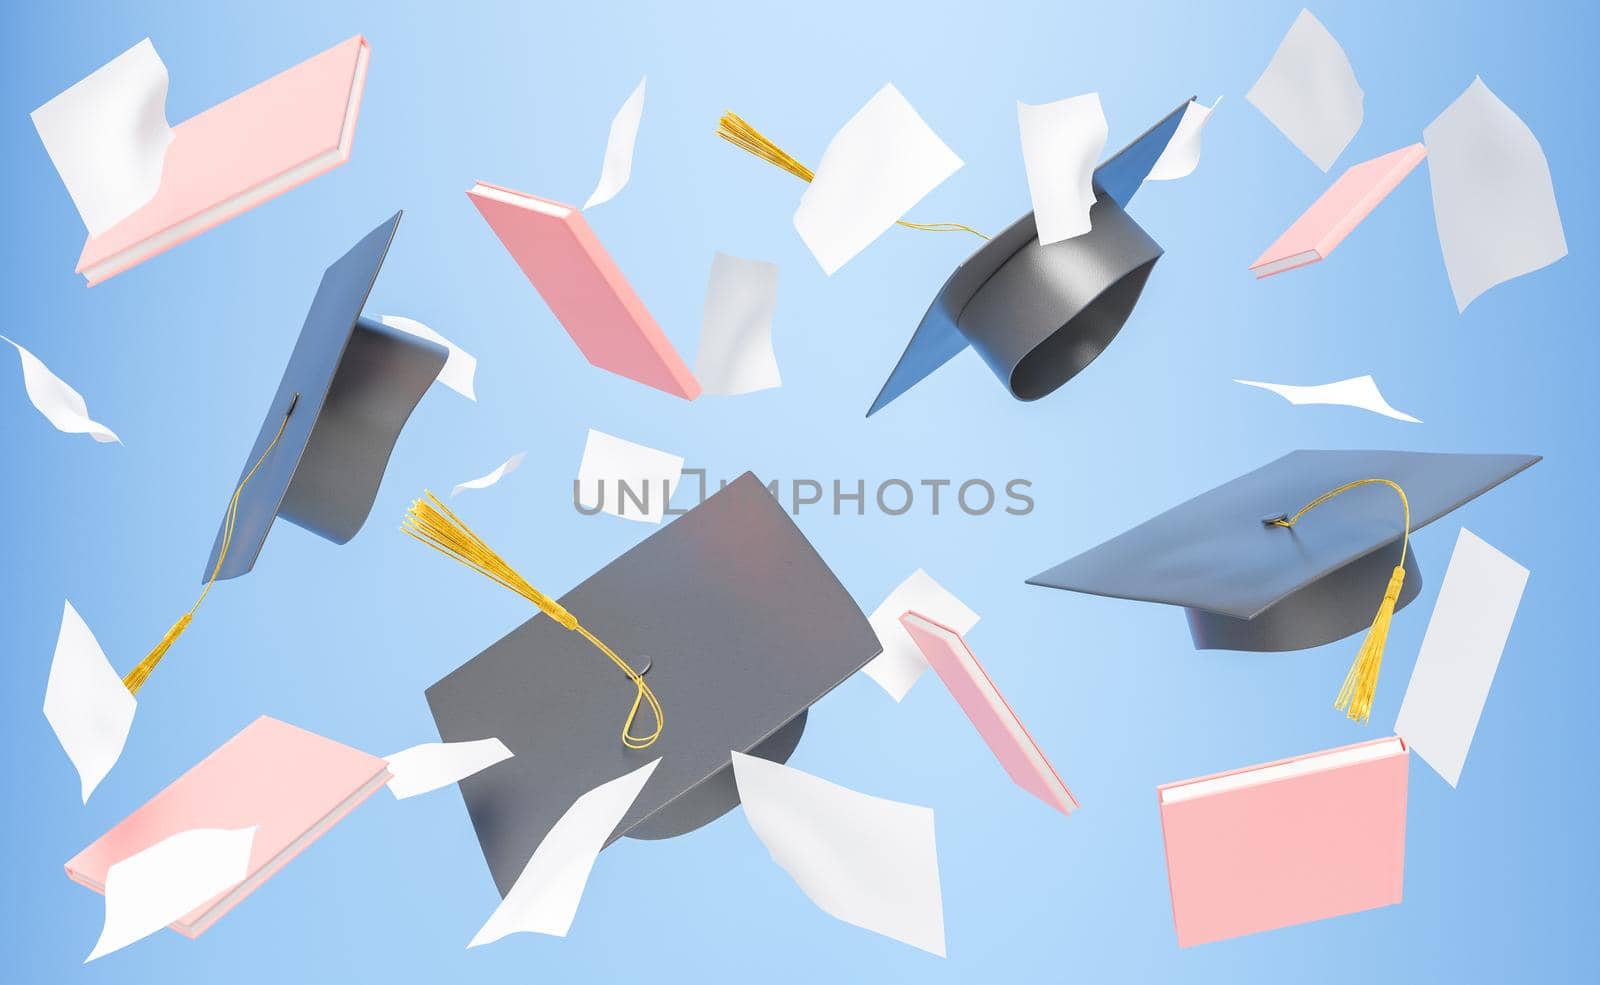 3d illustration of academic caps with pink books and blank pieces of paper tossed on blue background